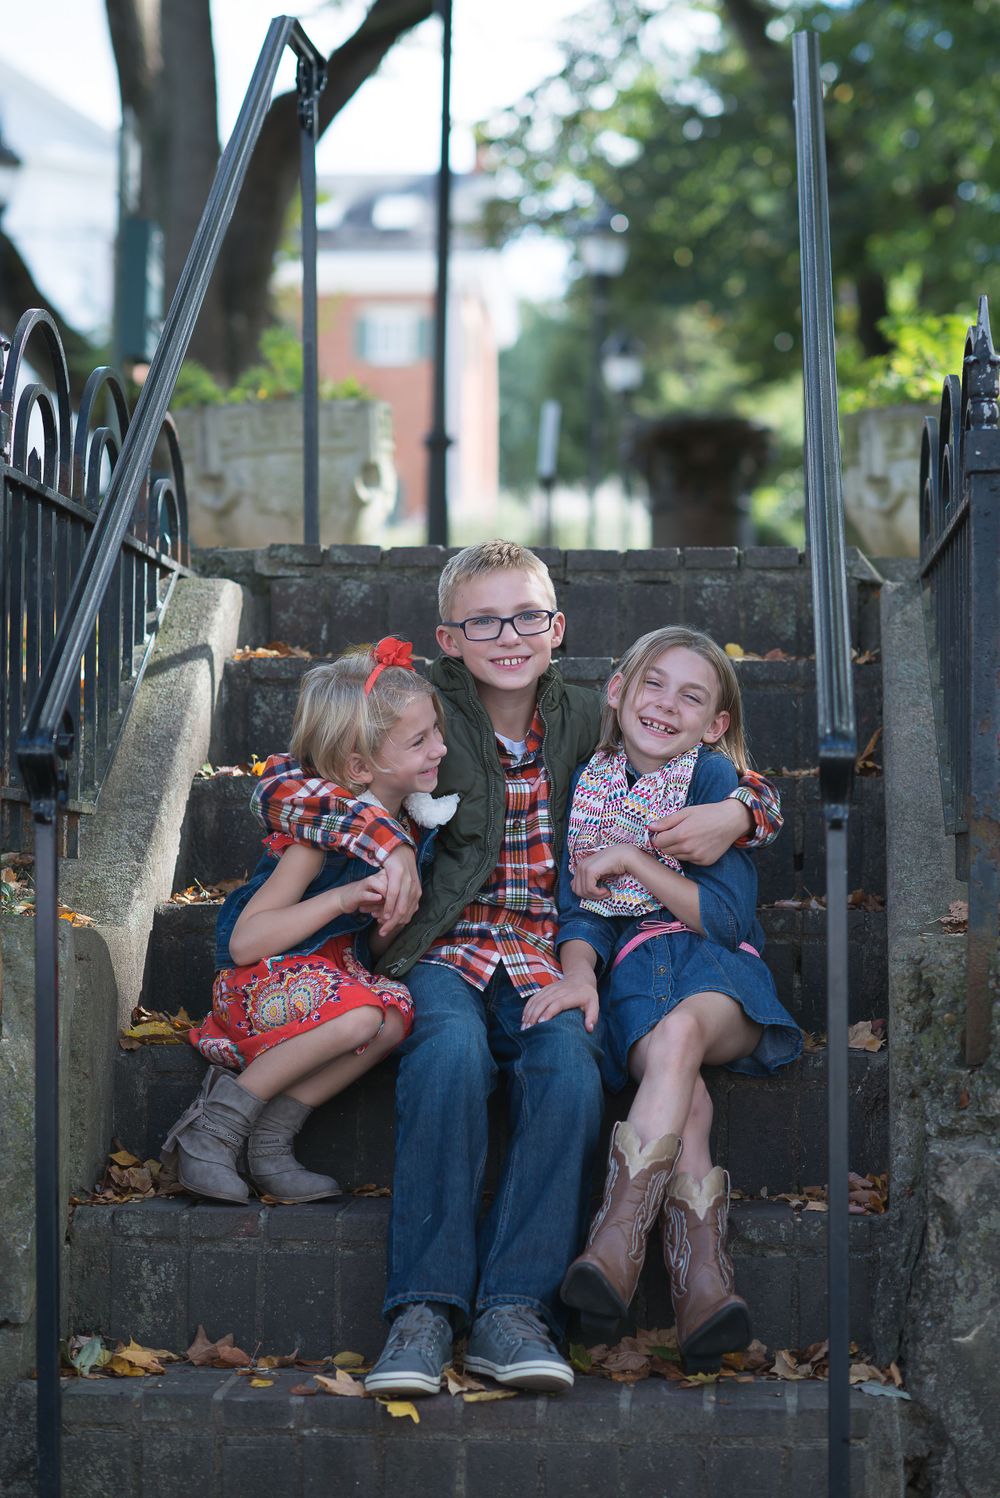 Three smiling children sitting together on outdoor steps.